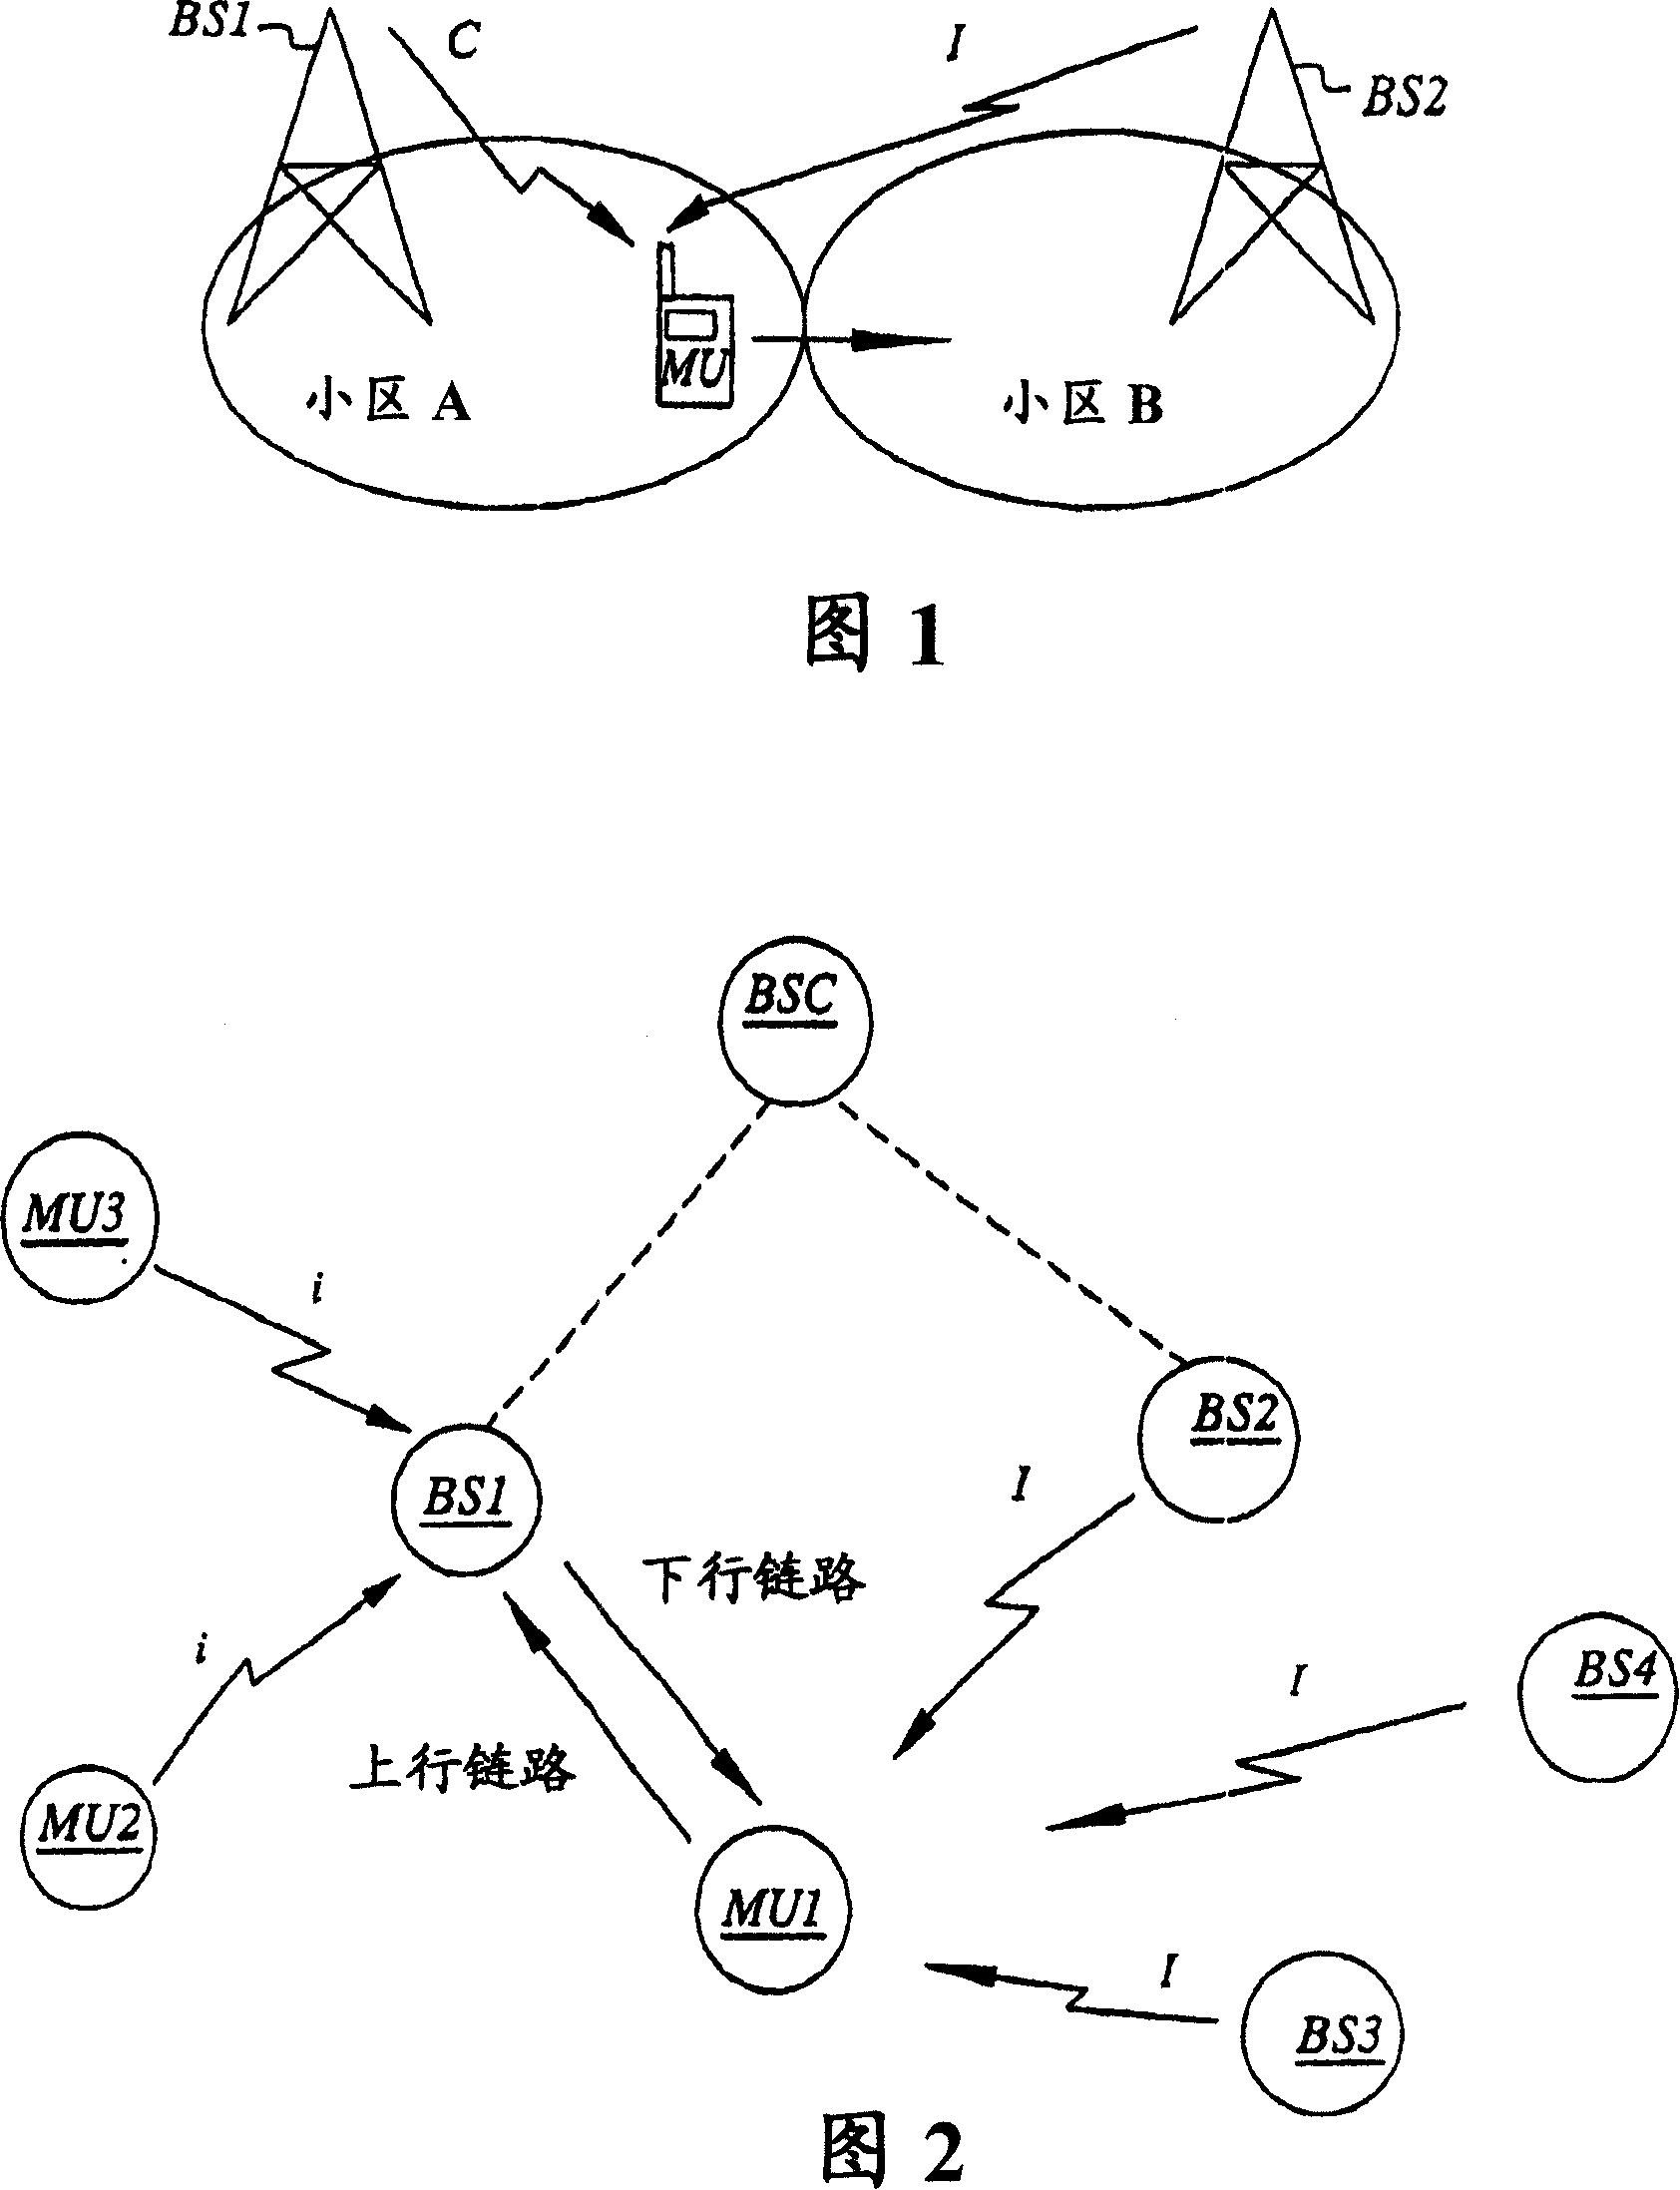 Method and arrangement for improved handover by muting interfering nodes